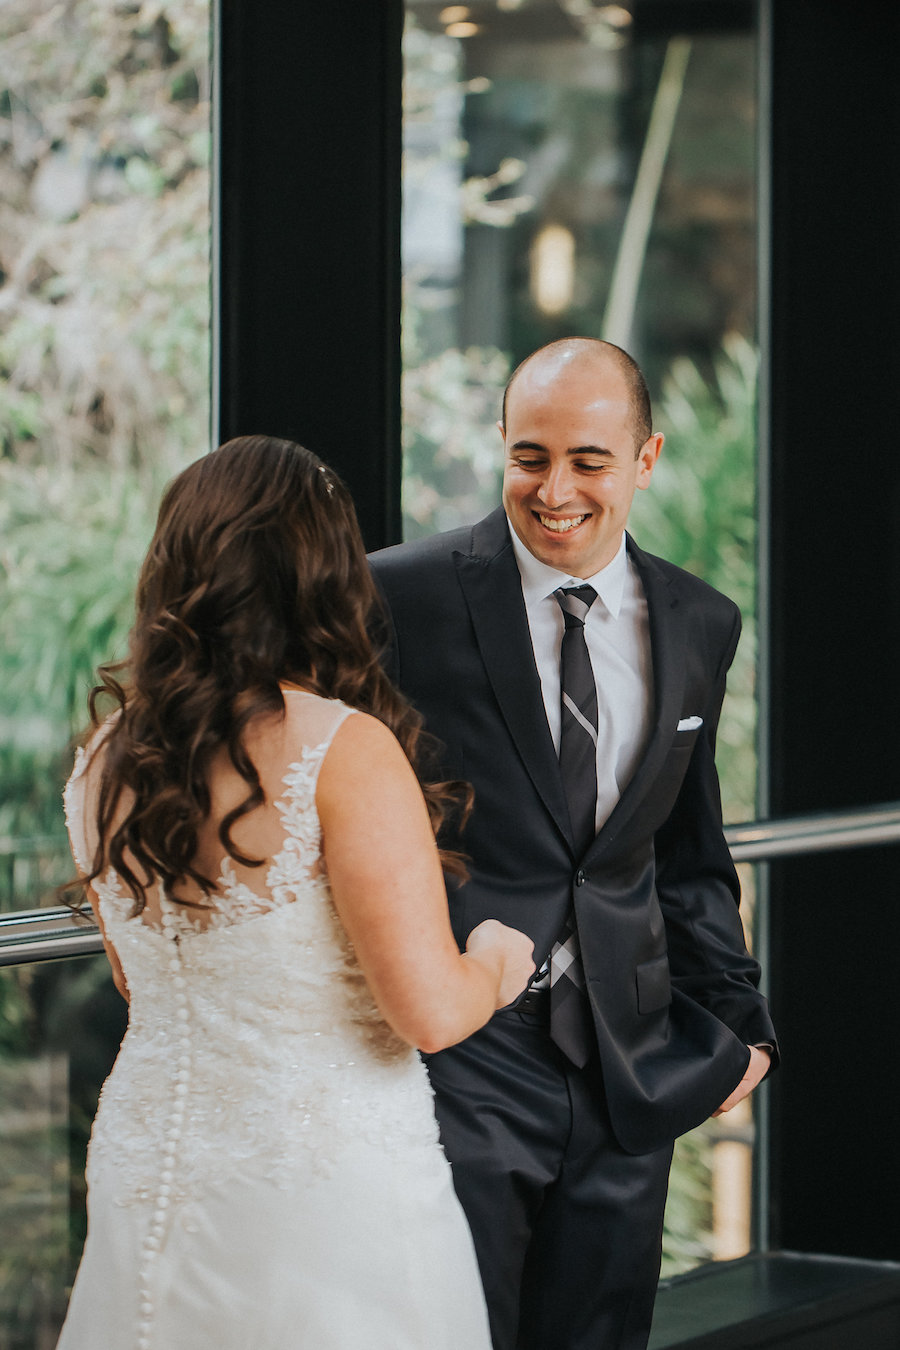 Bride and Groom First Look Wedding Portrait | Downtown Tampa Wedding Photographer Rad Red Creative